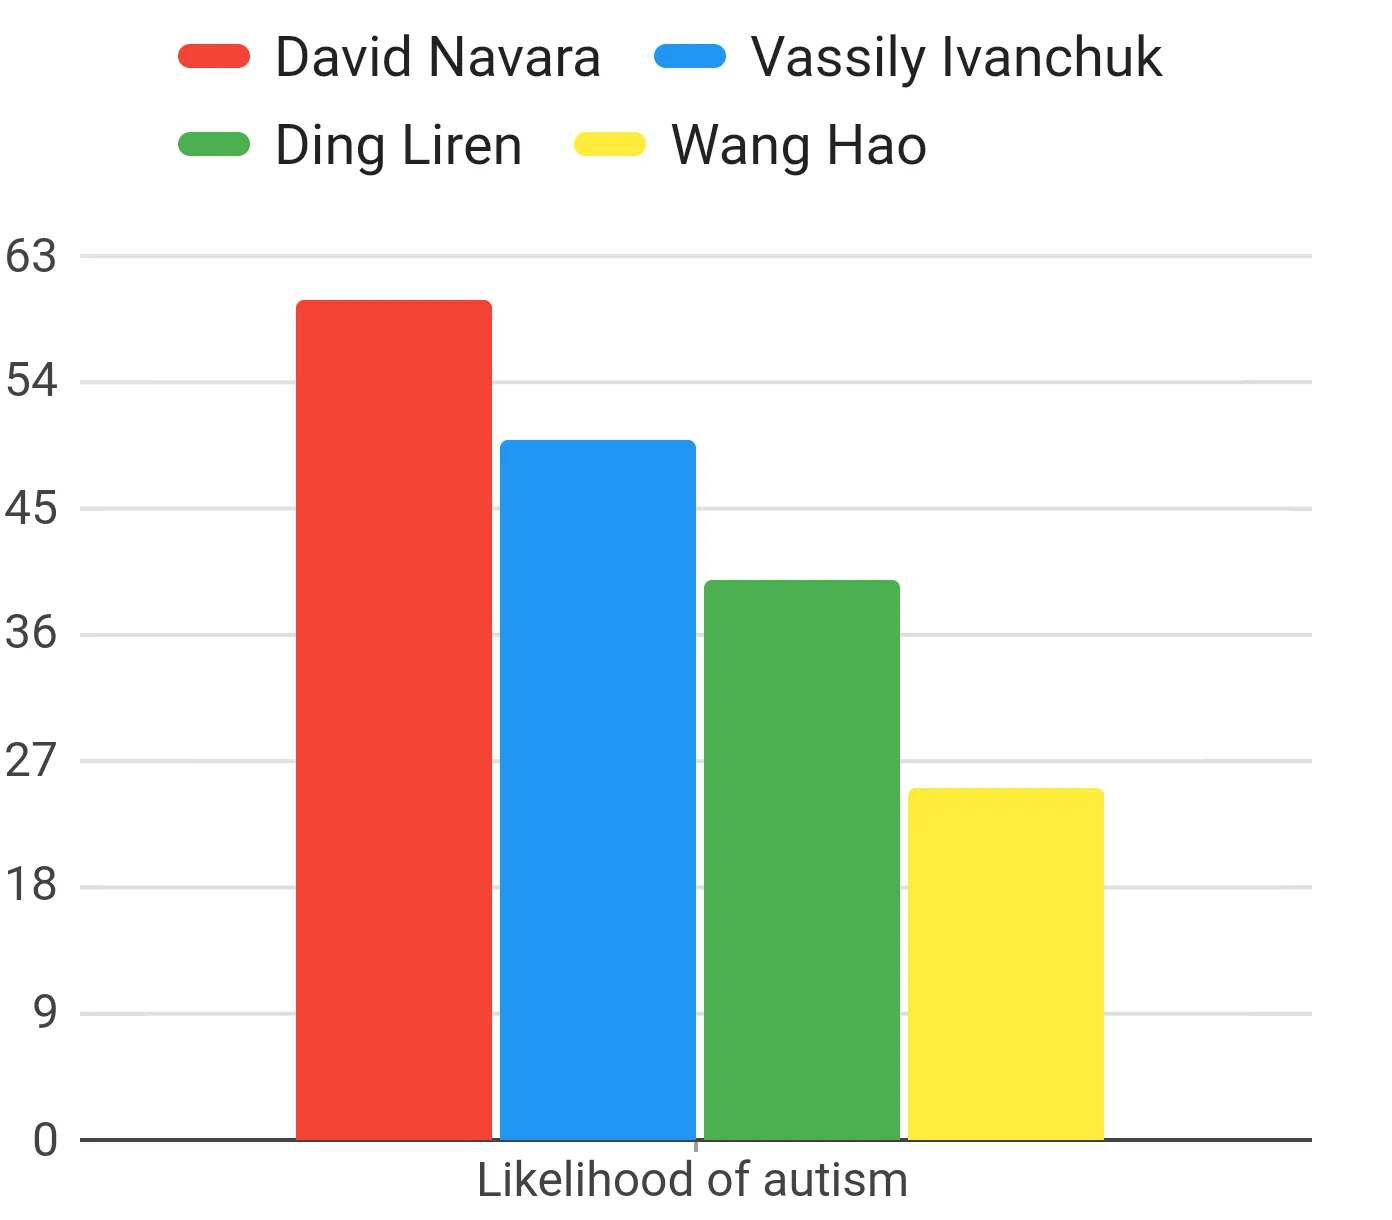 This chart list professional chess players who are likely to be autistic, and how likely they are to be autistic when compared to one another. 